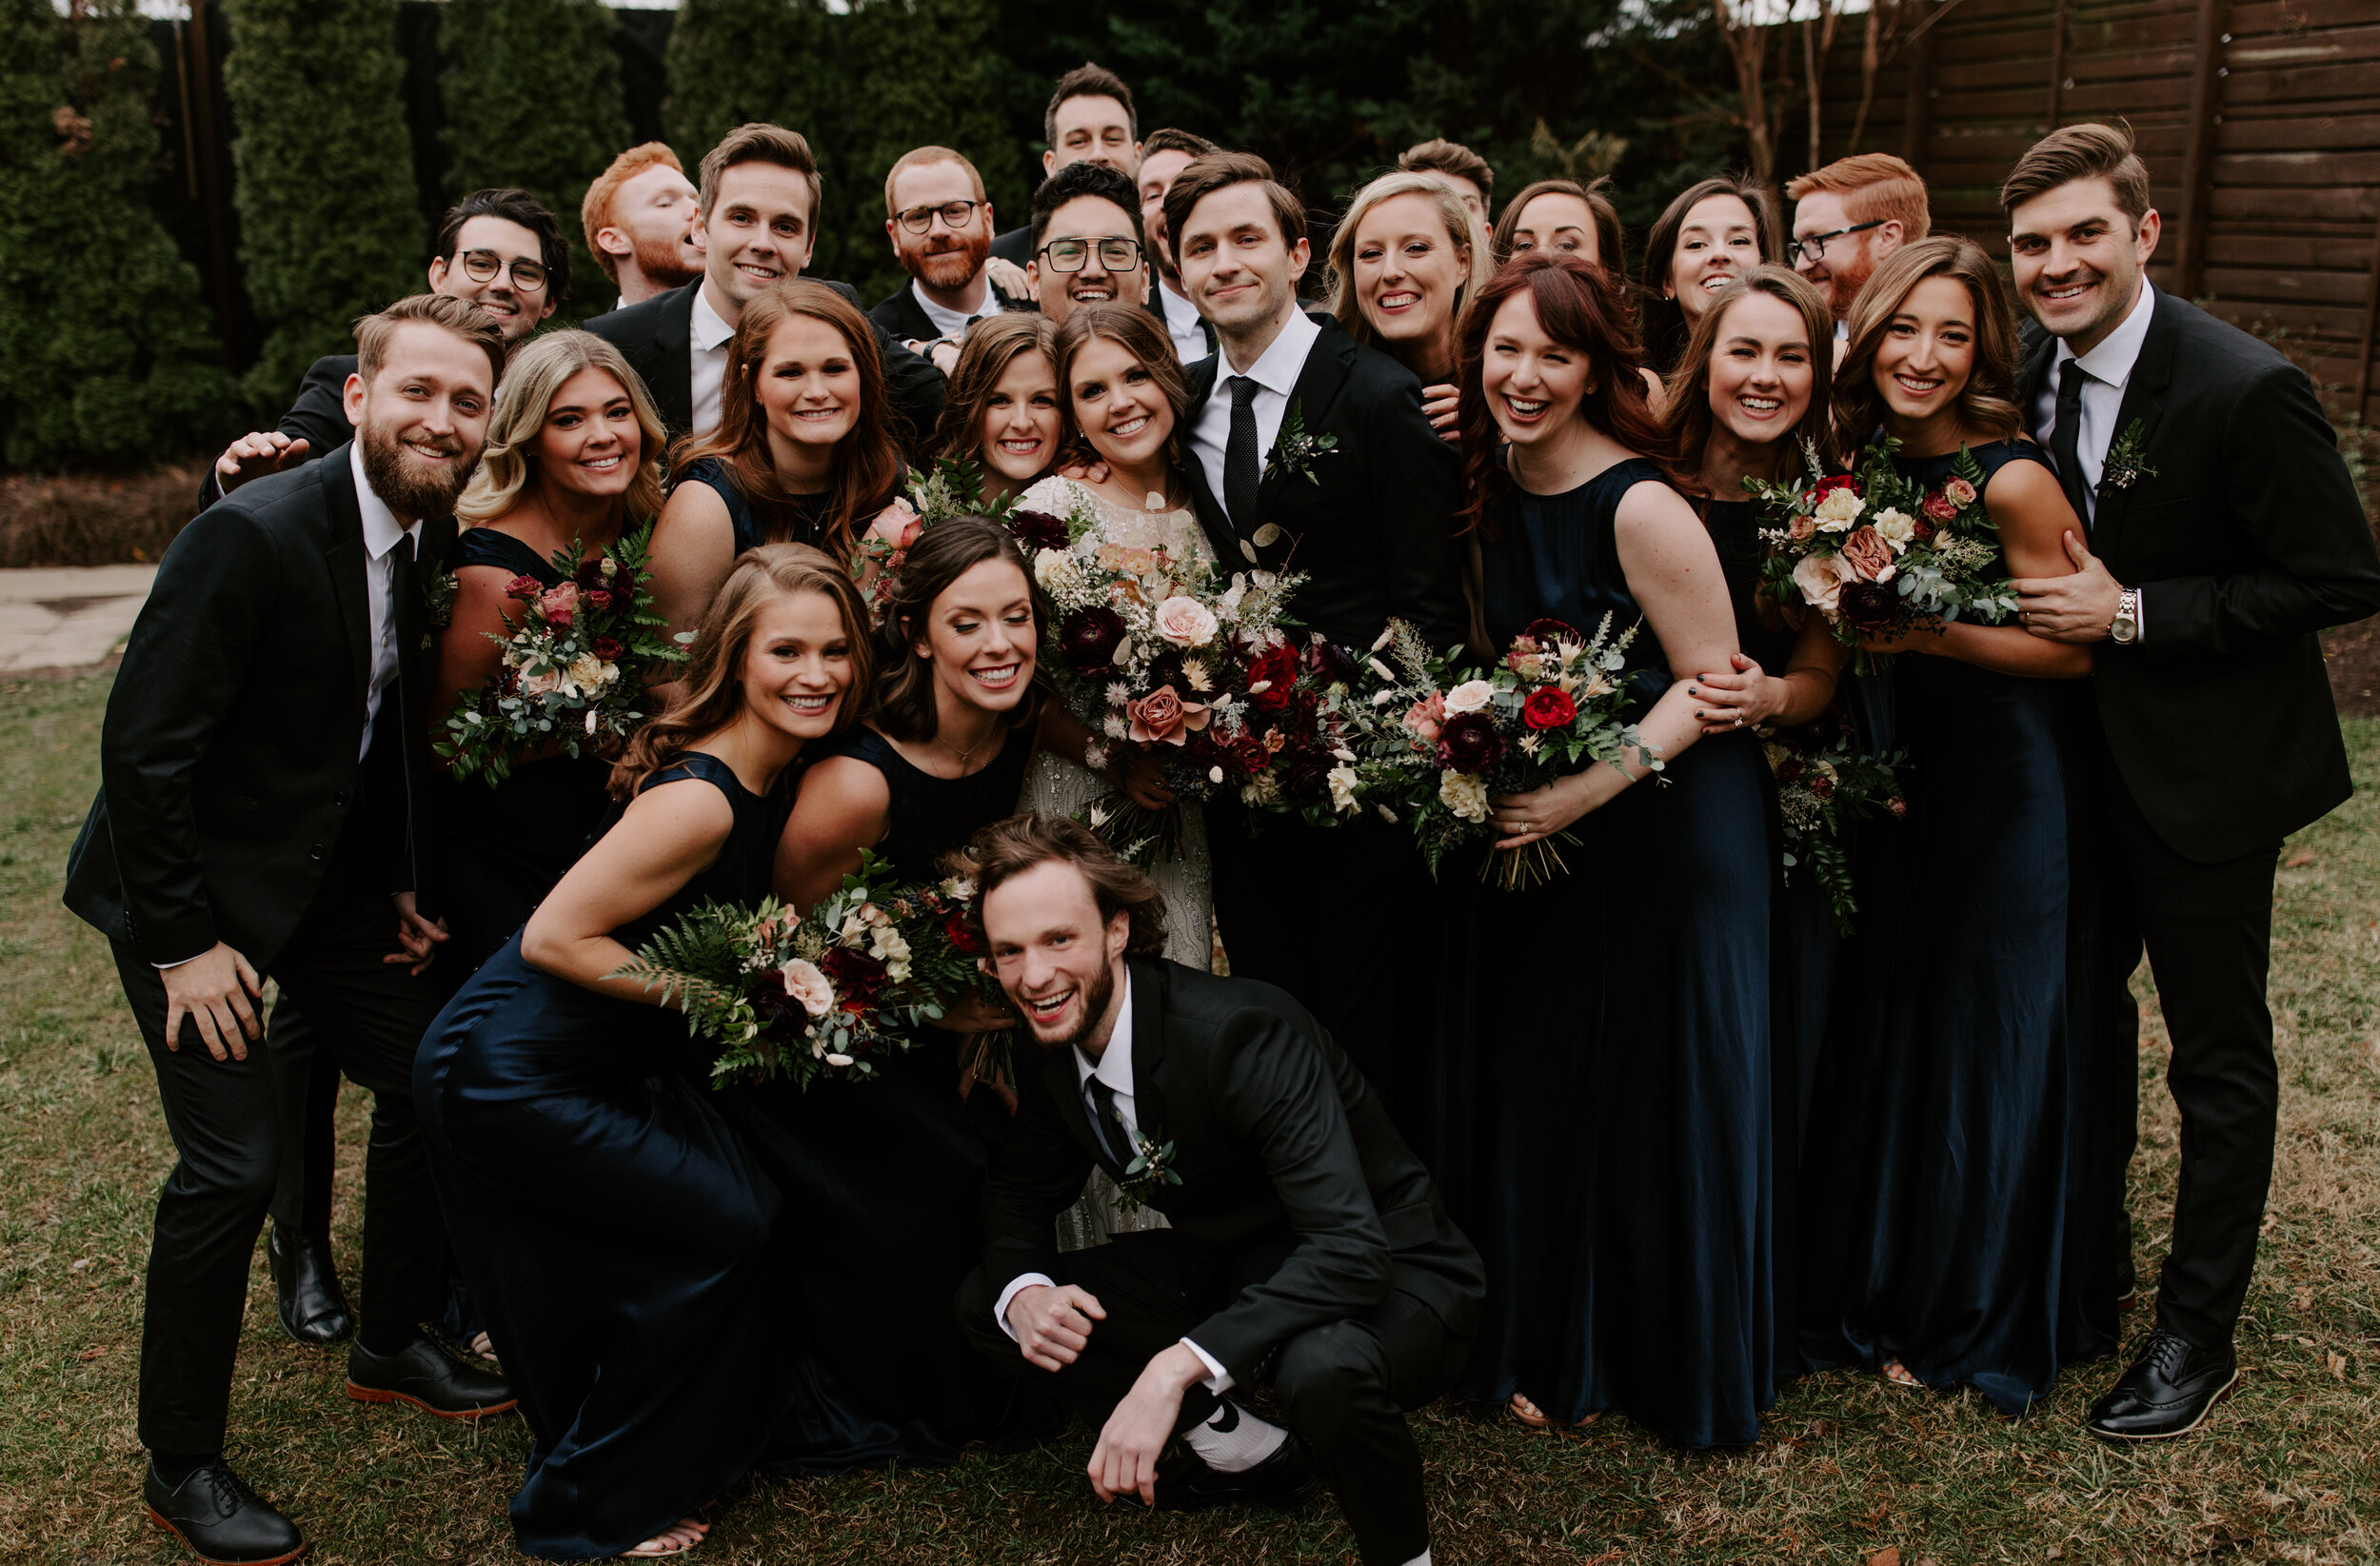 Navy silk bridesmaid dresses with jewel tone flowers with airy, natural greenery. Nashville wedding florist at the Cordelle.